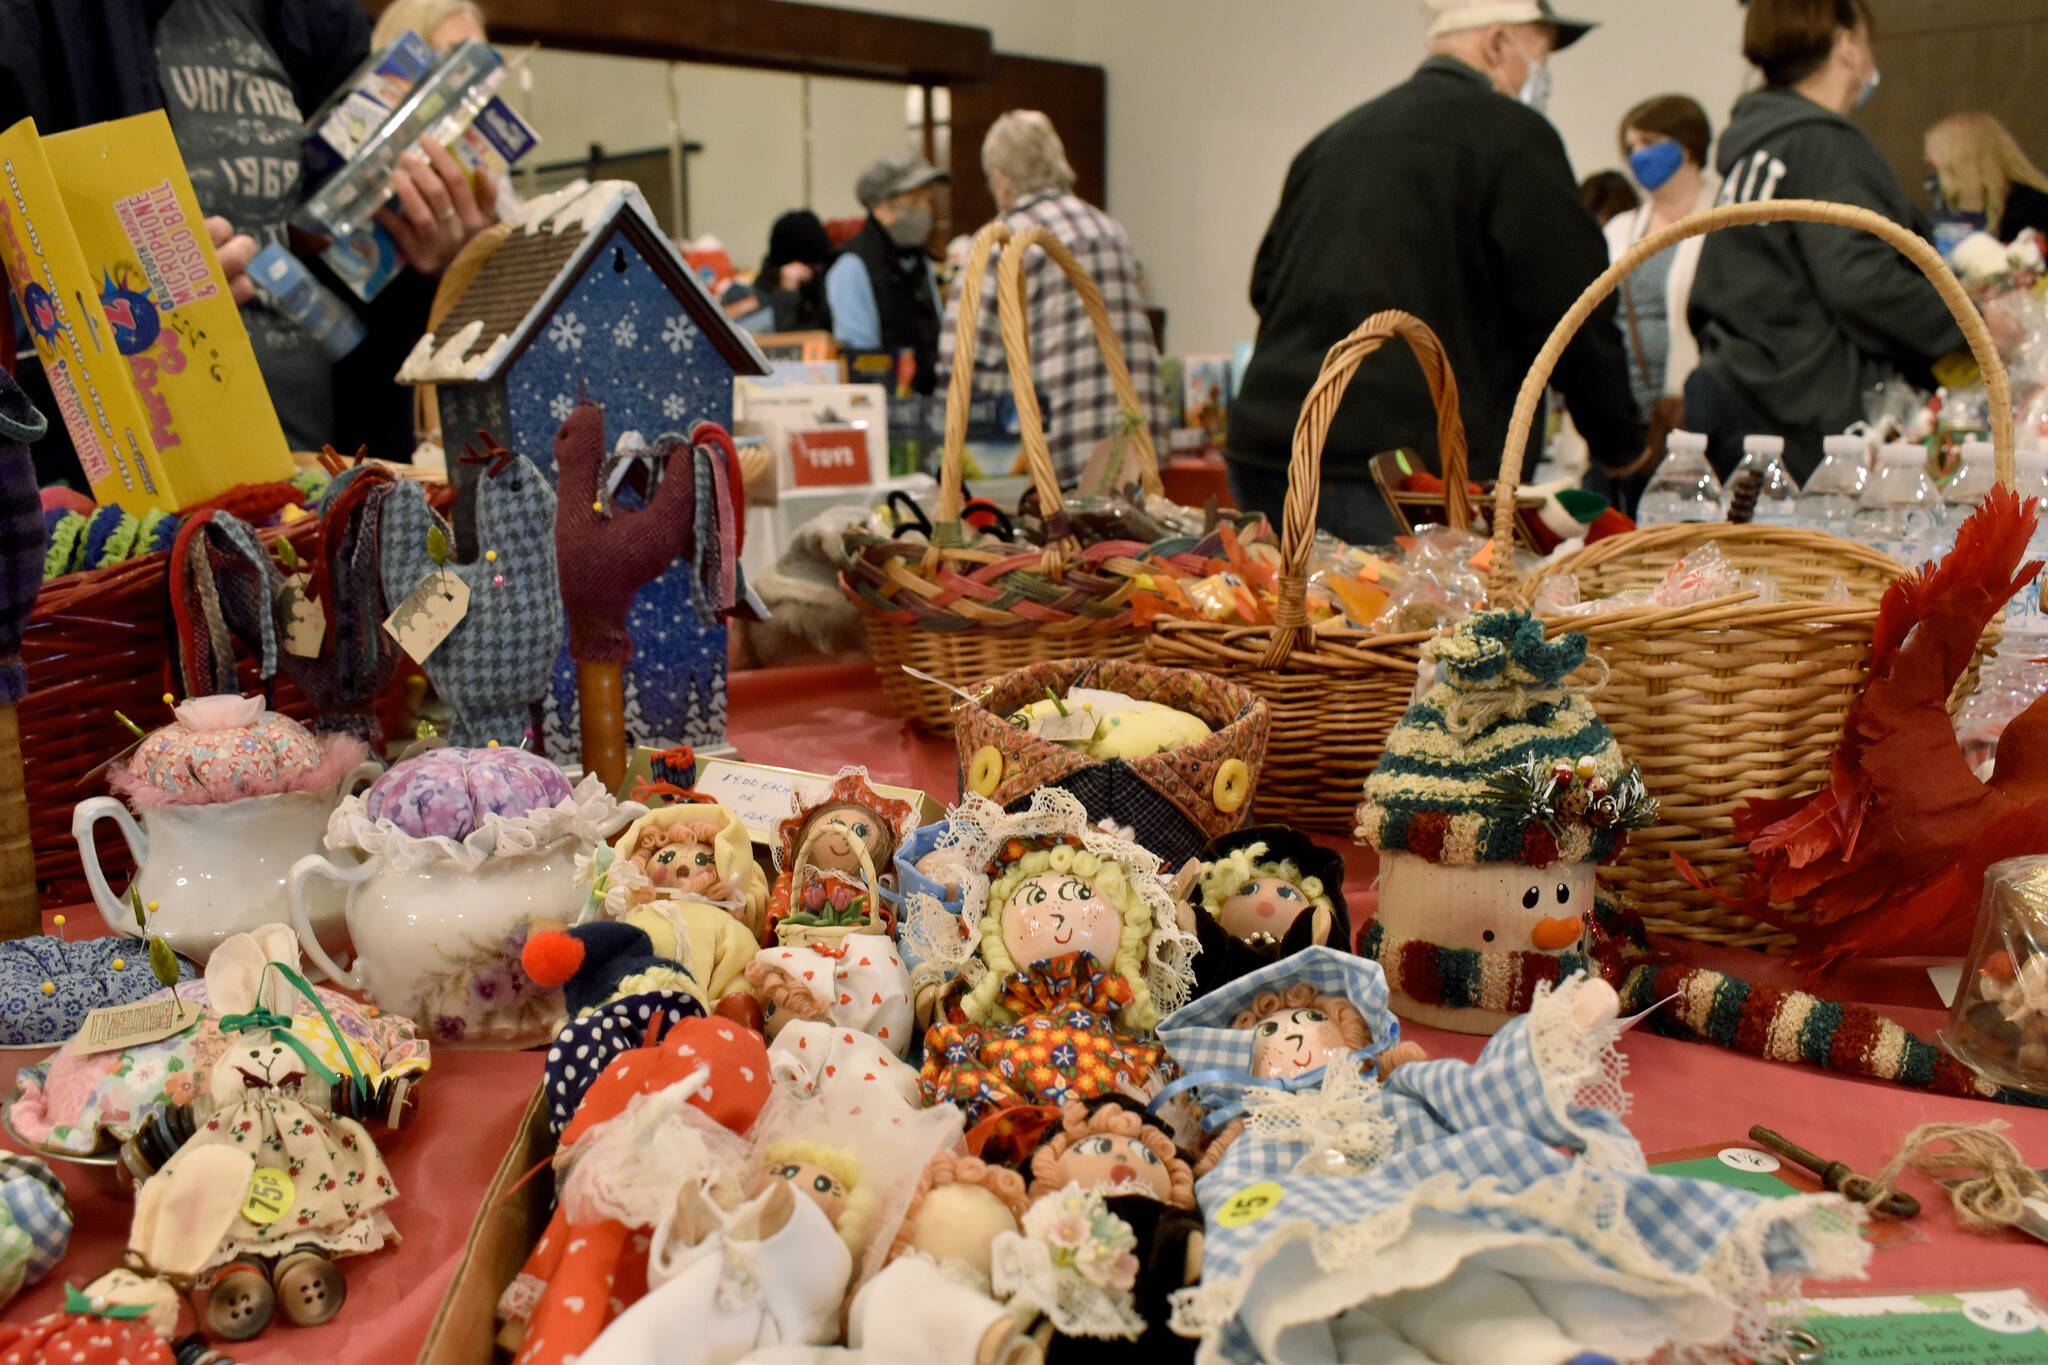 Photo by Alex Bruell 
Dolls, birdhouses, and holiday swags were among the many goods sold to raise money for Mary Bridge Children’s Hospital.